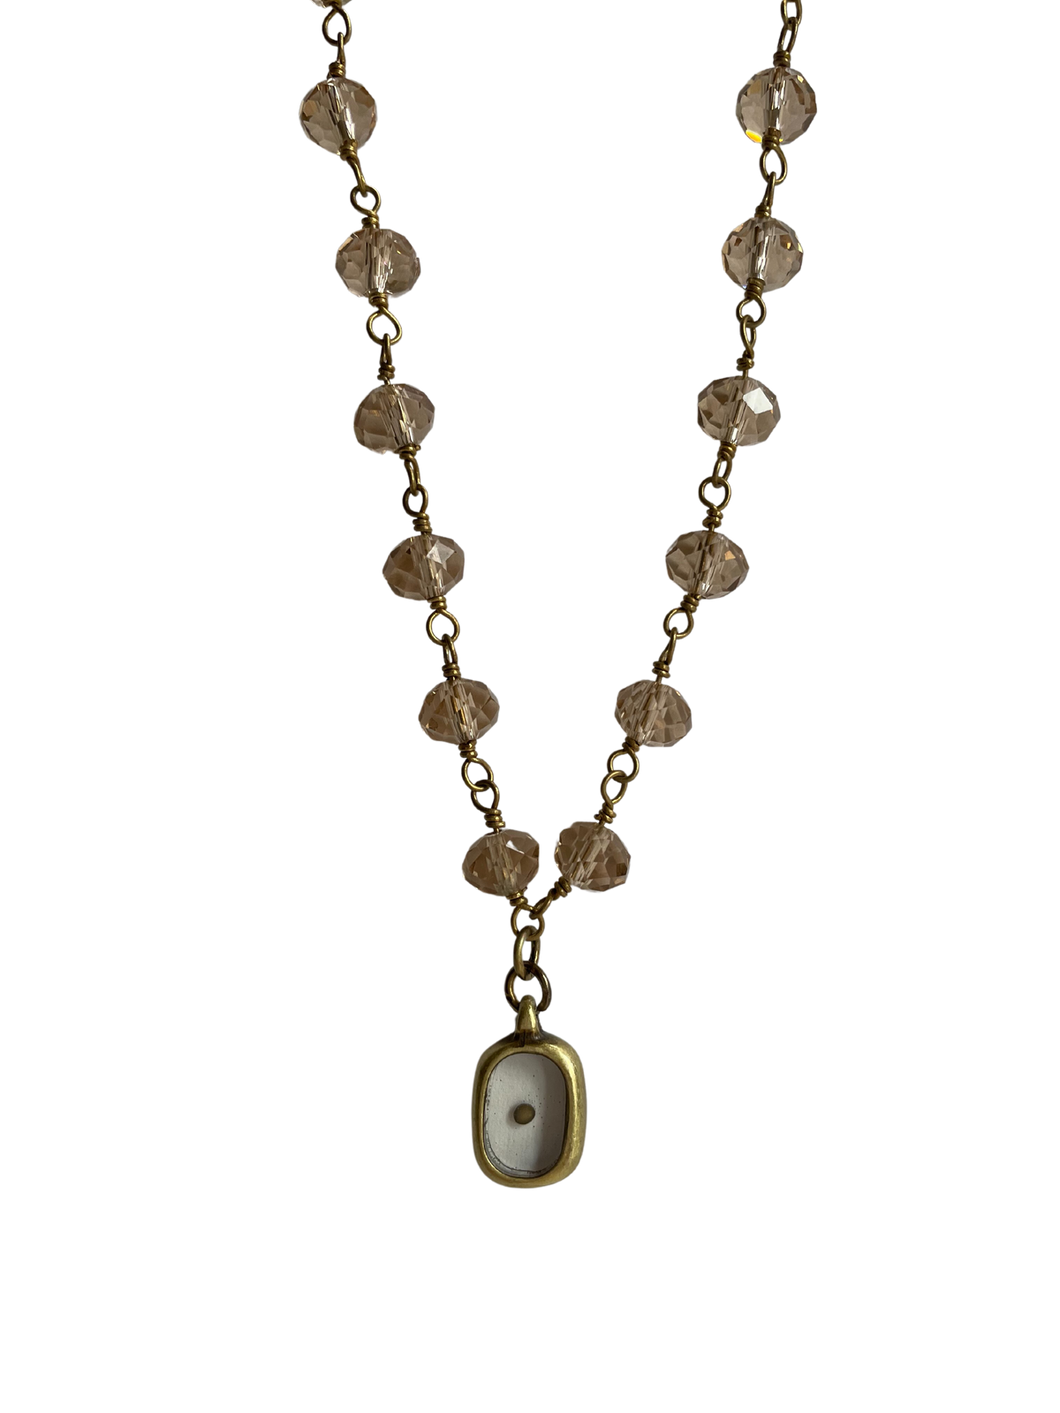 Mustard Seed Charm Necklace - Faceted Champagne Quartz